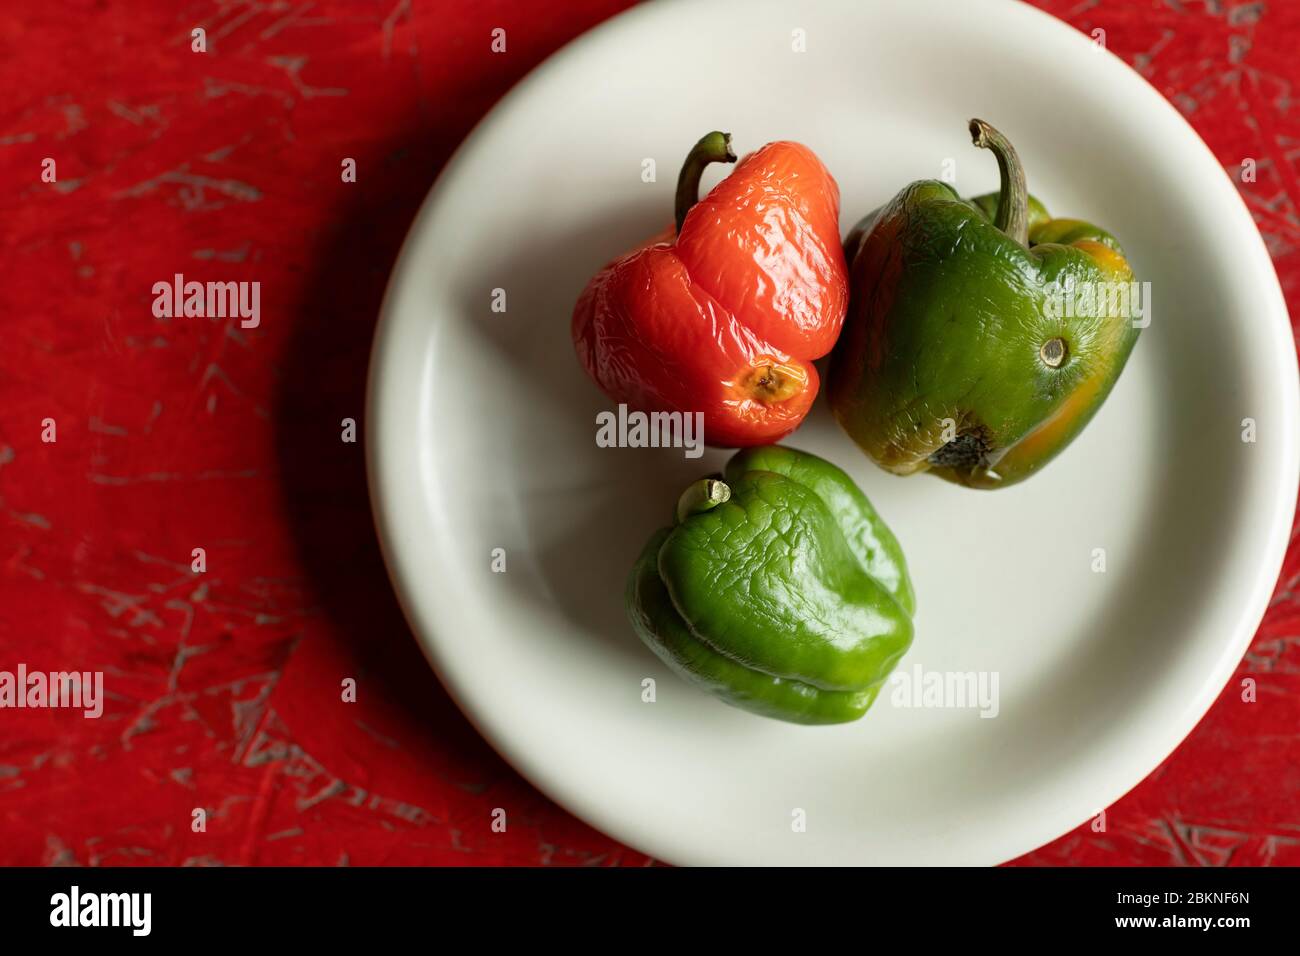 Rotten Red And Green Bell Peppers On A White Plate And A Wooden Red Textured Background Food Waste Compost Flat Lay Shot Horizontal Stock Photo Alamy